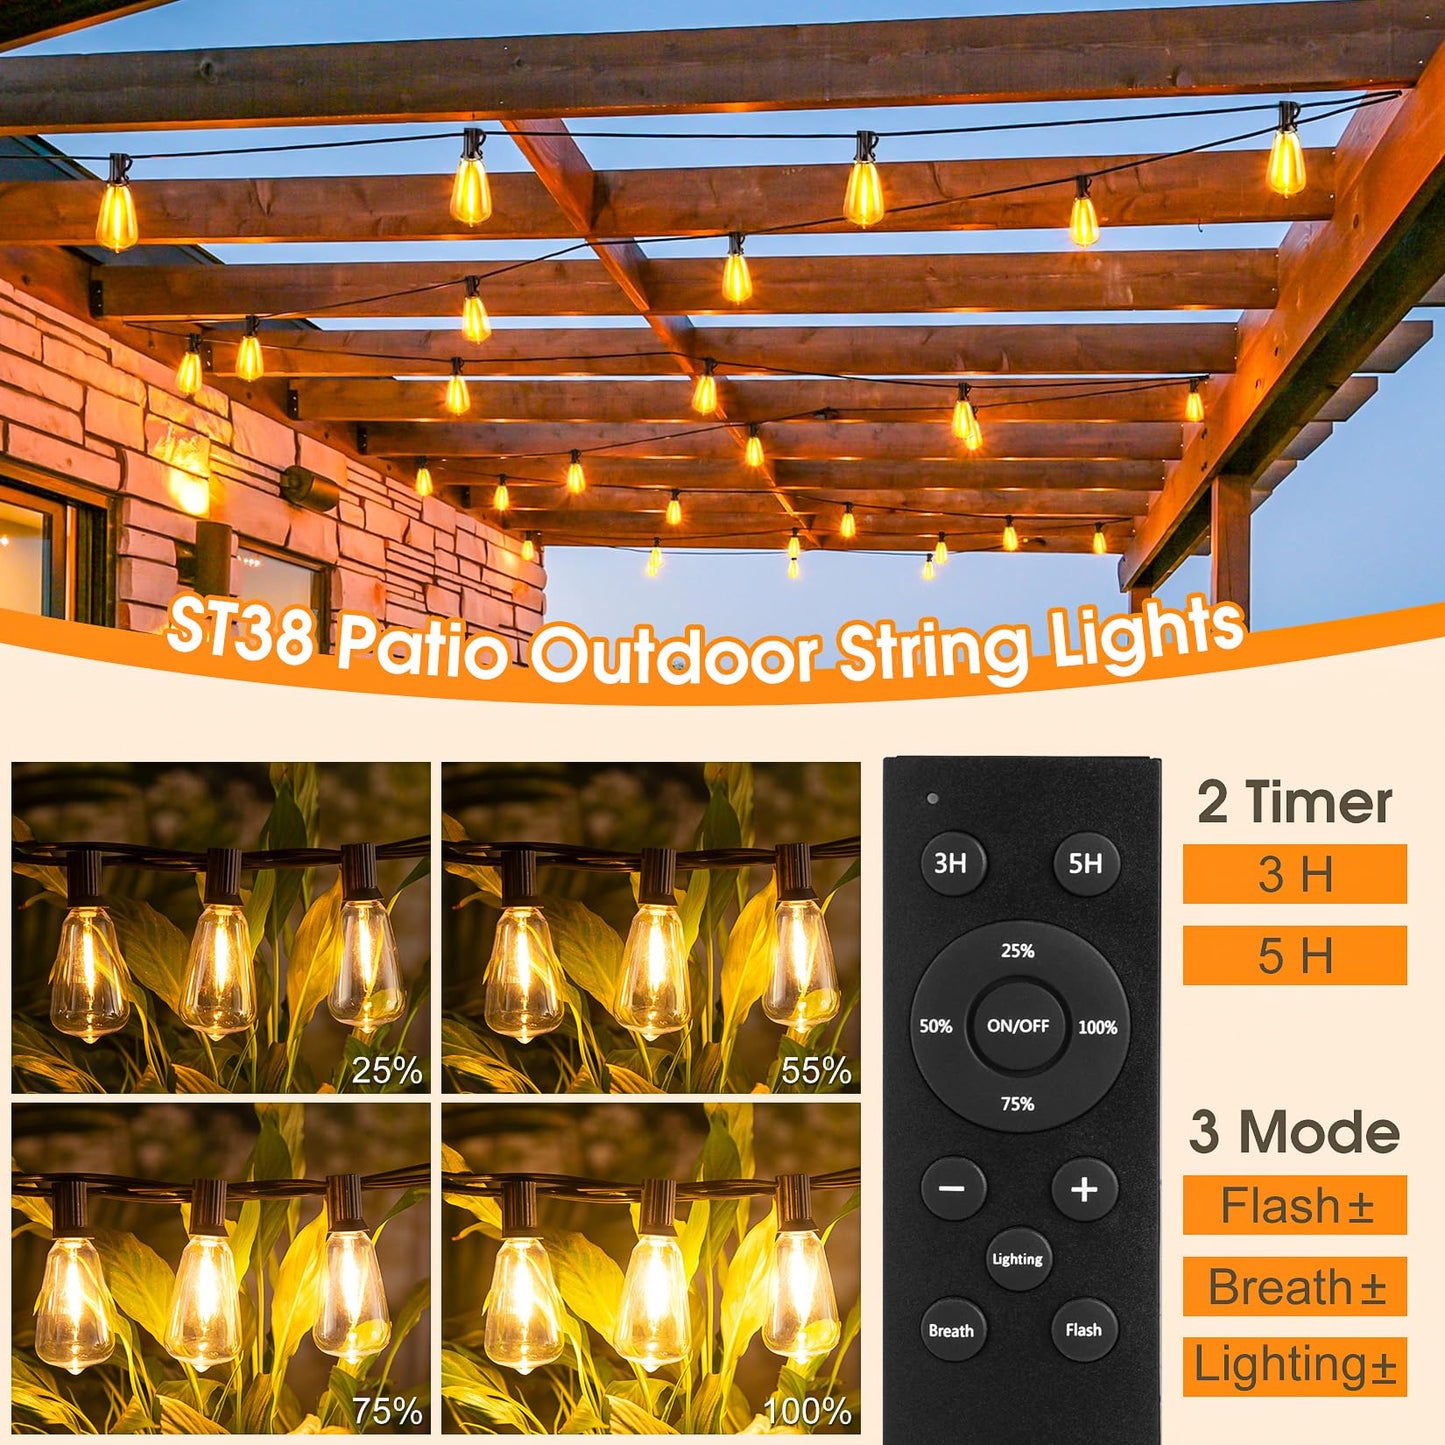 Outdoor String Lights with Remote, 100FT Low Voltage More Safety Waterproof & Shatterproof Hanging Patio Lights with LED Edison Bulbs, Dimmable Timer Outside Lighting for Backyard Balcony Deck